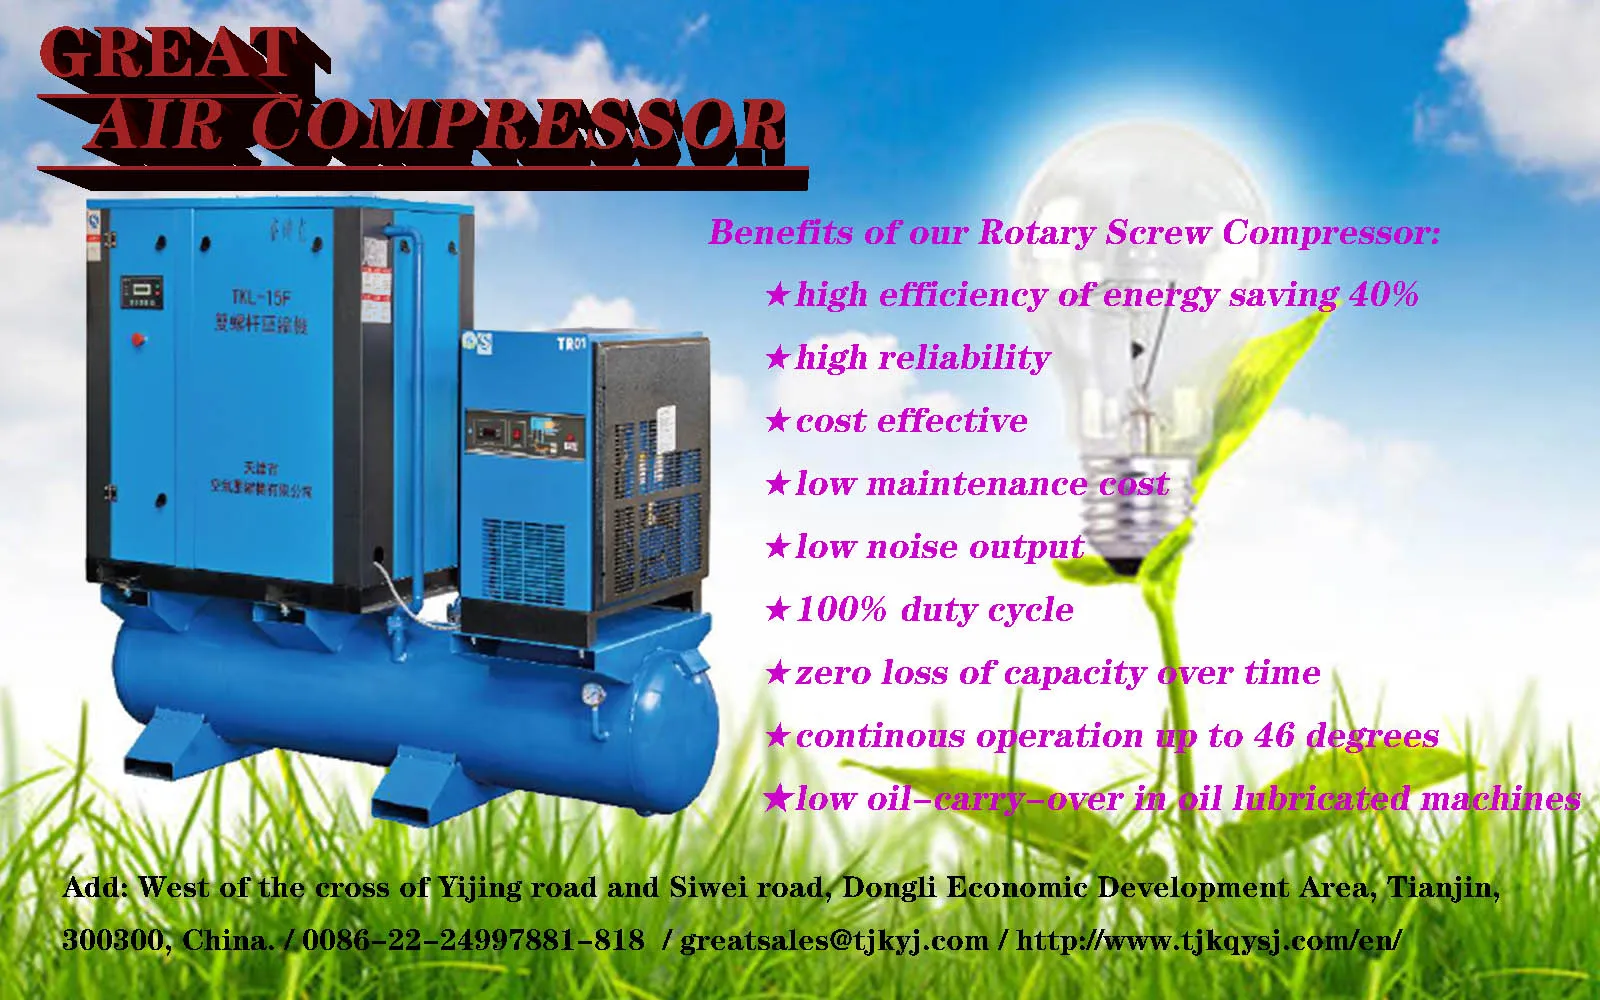 4-in-1 Rotary Screw Air Compressor with air dryer,air tanker and piping filters for laser cutting machines